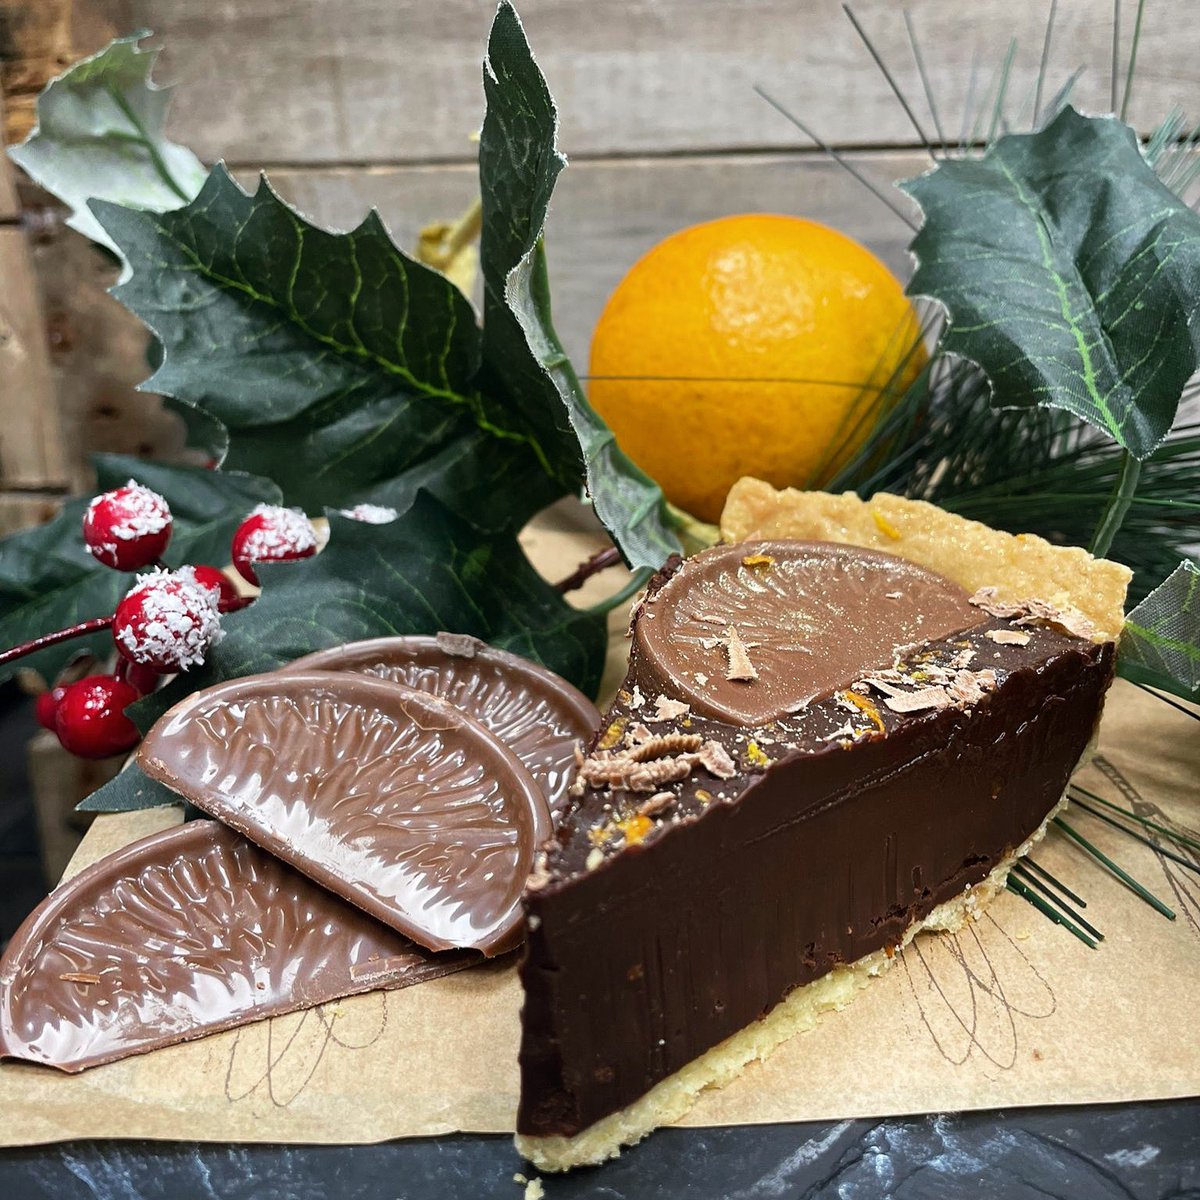 Chocolate Orange Tart… Soooo rich, you need this in your day.  Festive baking in full swing in Clevedon. 

#pullinsbakery #bs21 #clevedon #independentclevedon #chocolateorange #chocoholics